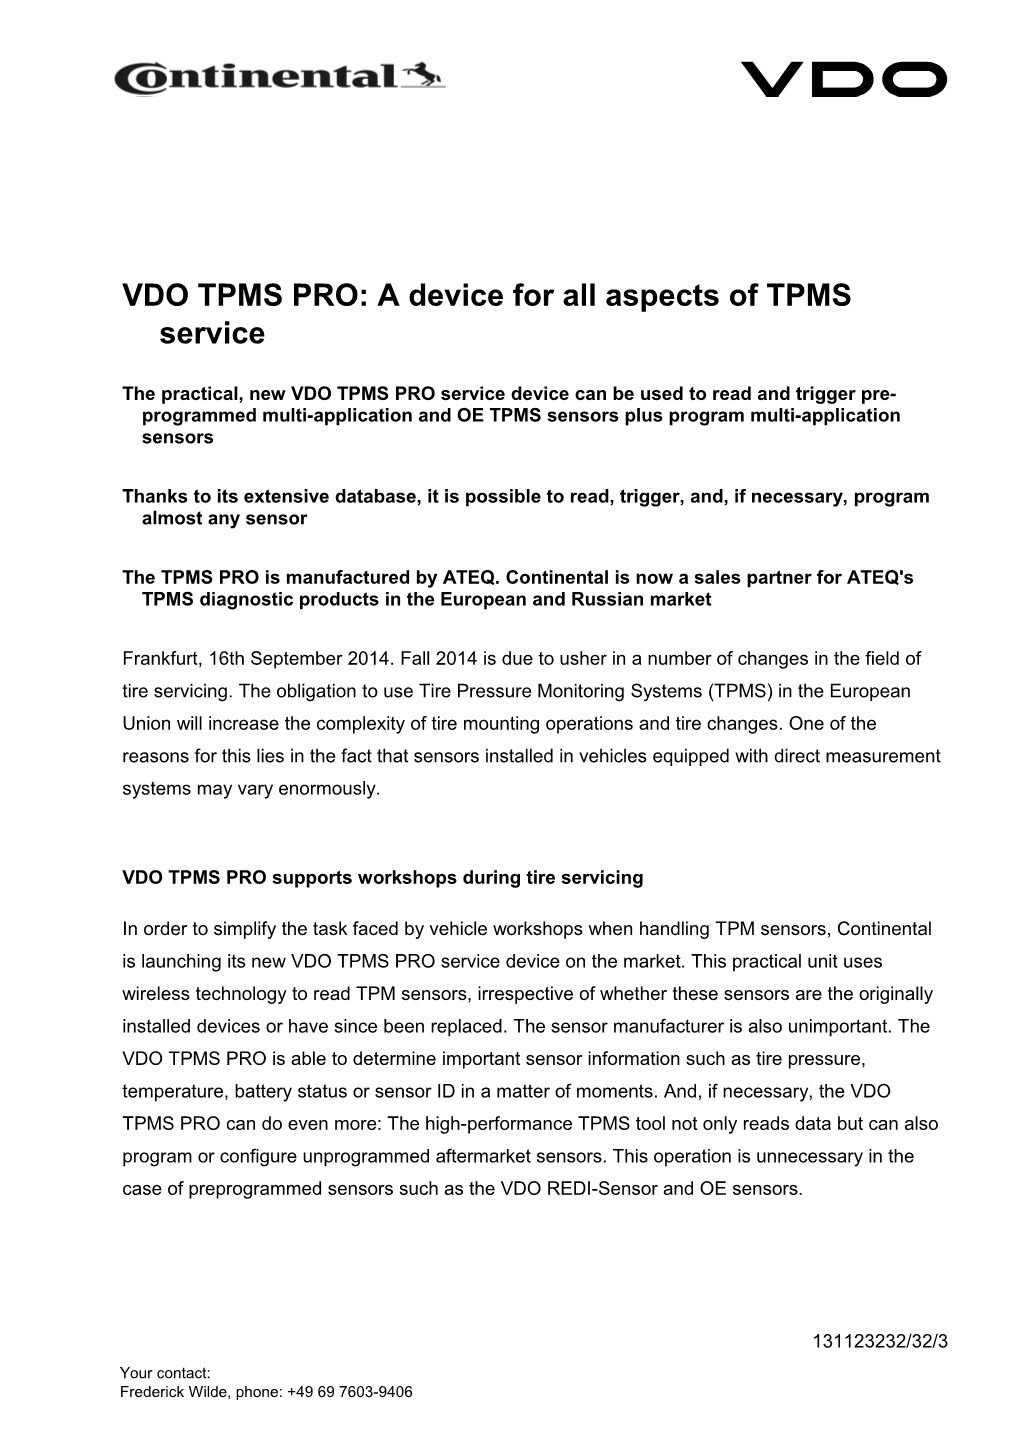 VDO TPMS PRO: a Device for All Aspects of TPMS Service